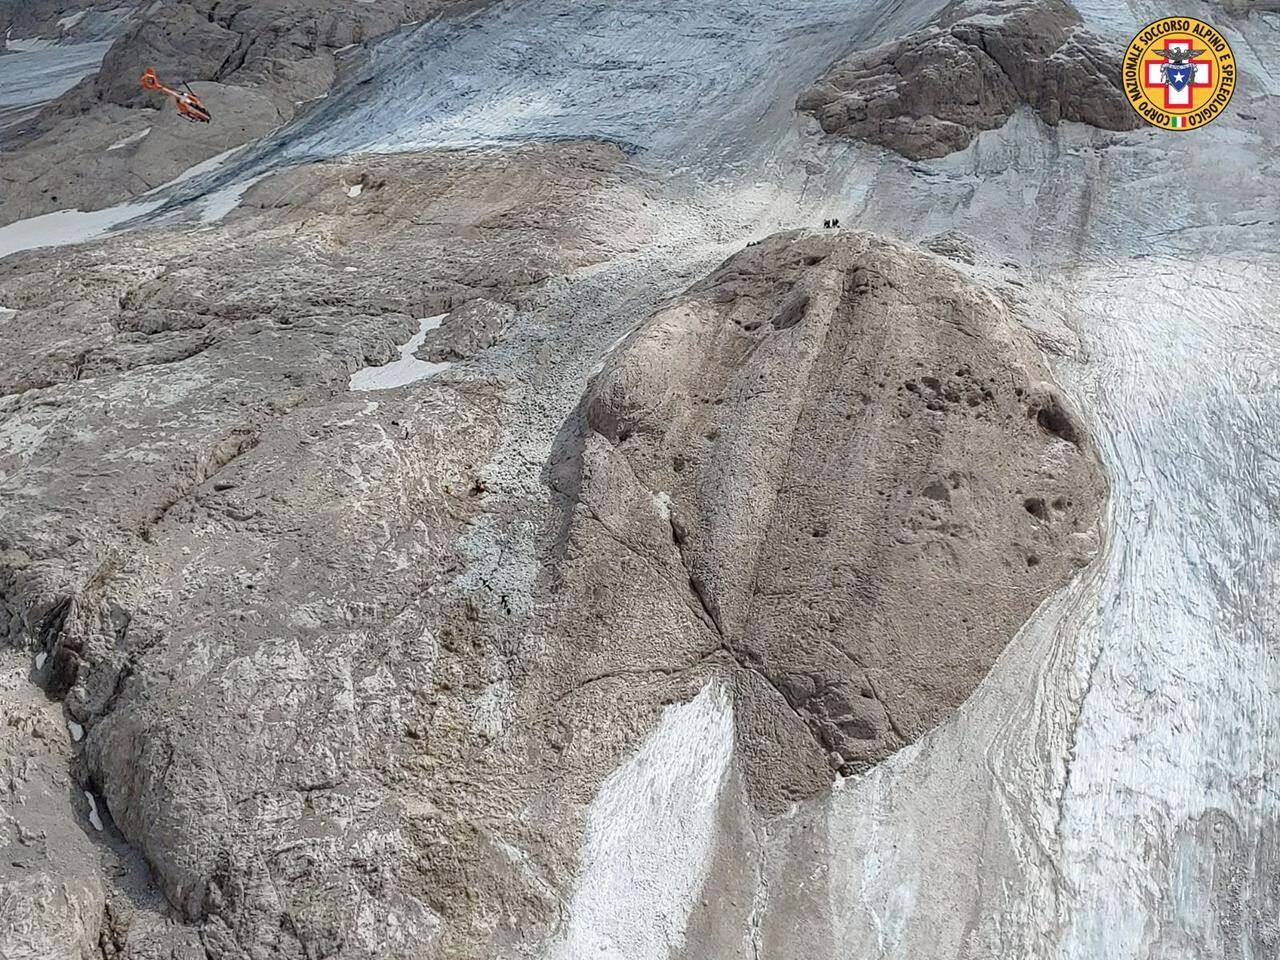 This image released on Sunday, July 3, 2022, by the Italian National Alpine and Cave Rescue Corps shows the glacier in Italy’s Alps near Trento a large chunk of which has broken loose, killing at least six hikers and injuring eight others. Alpine rescue service officials, which provided that toll Sunday evening, said it could take hours to determine if any hikers might be missing. The National Alpine and Cave Rescue Corps tweeted that the search of the involved area of Marmolada peak involved at least five helicopters and rescue dogs. (Corpo Nazionale Soccorso Alpino e Speleologico via AP)